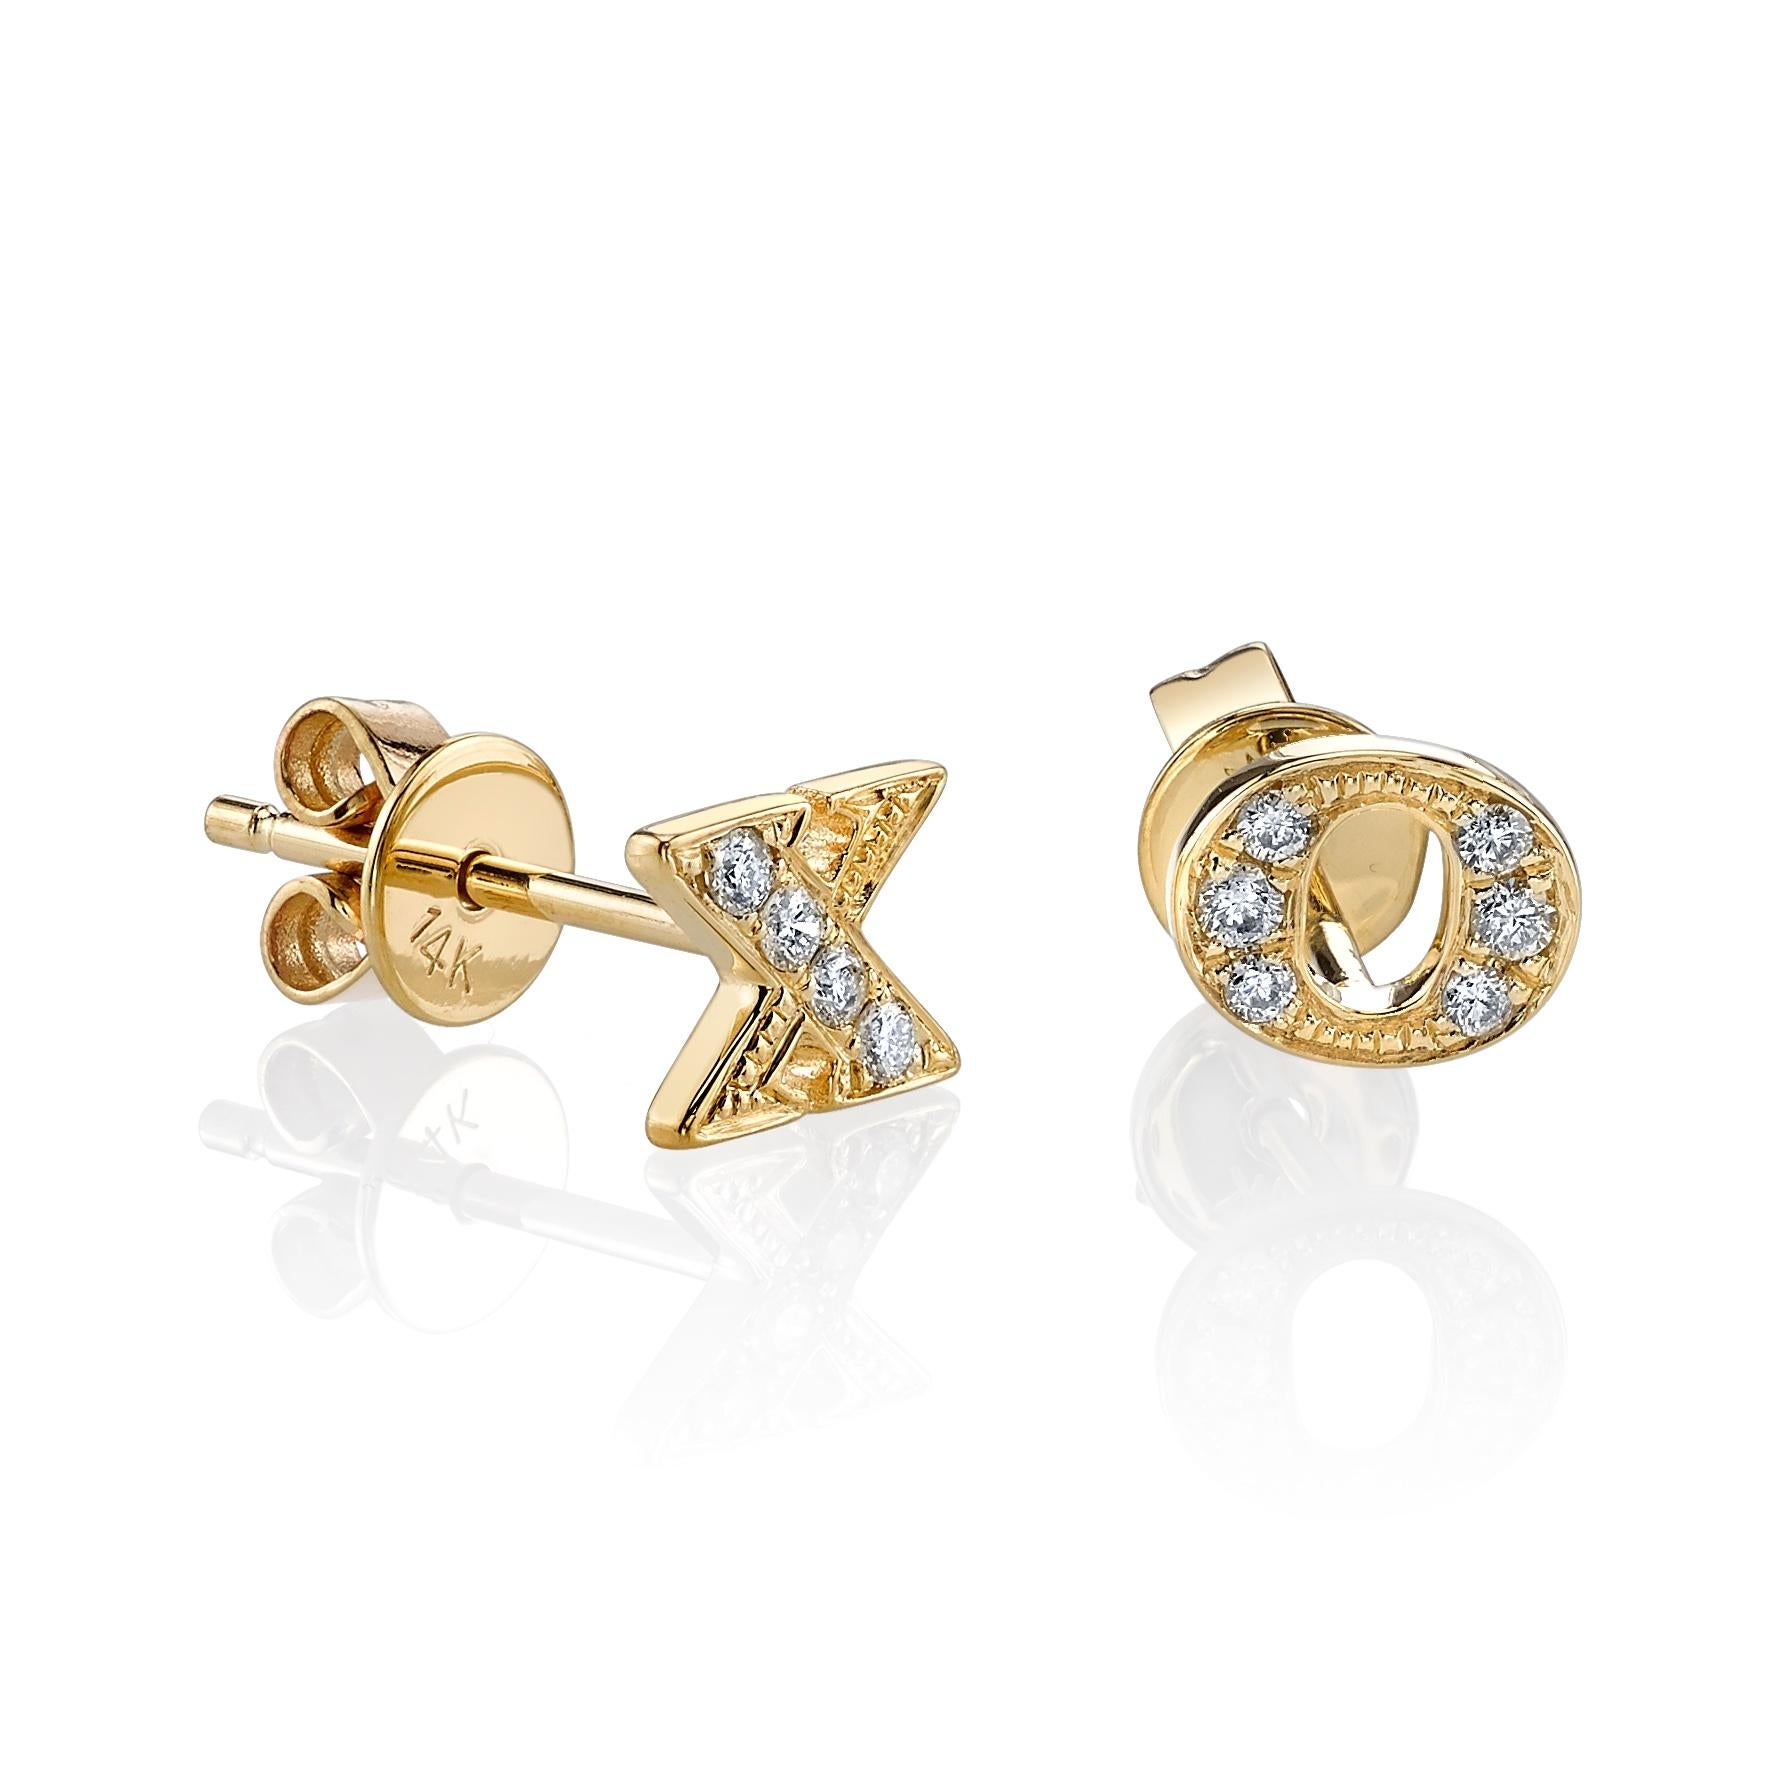 These 14k yellow gold earrings from celebrity favorite L.A designer, Sydney Evan are cool and chic. 
White diamonds totaling 0.09 carats give these delicate earrings a hint of sparkle and add just the kind of subtly luxurious detail that Evan is